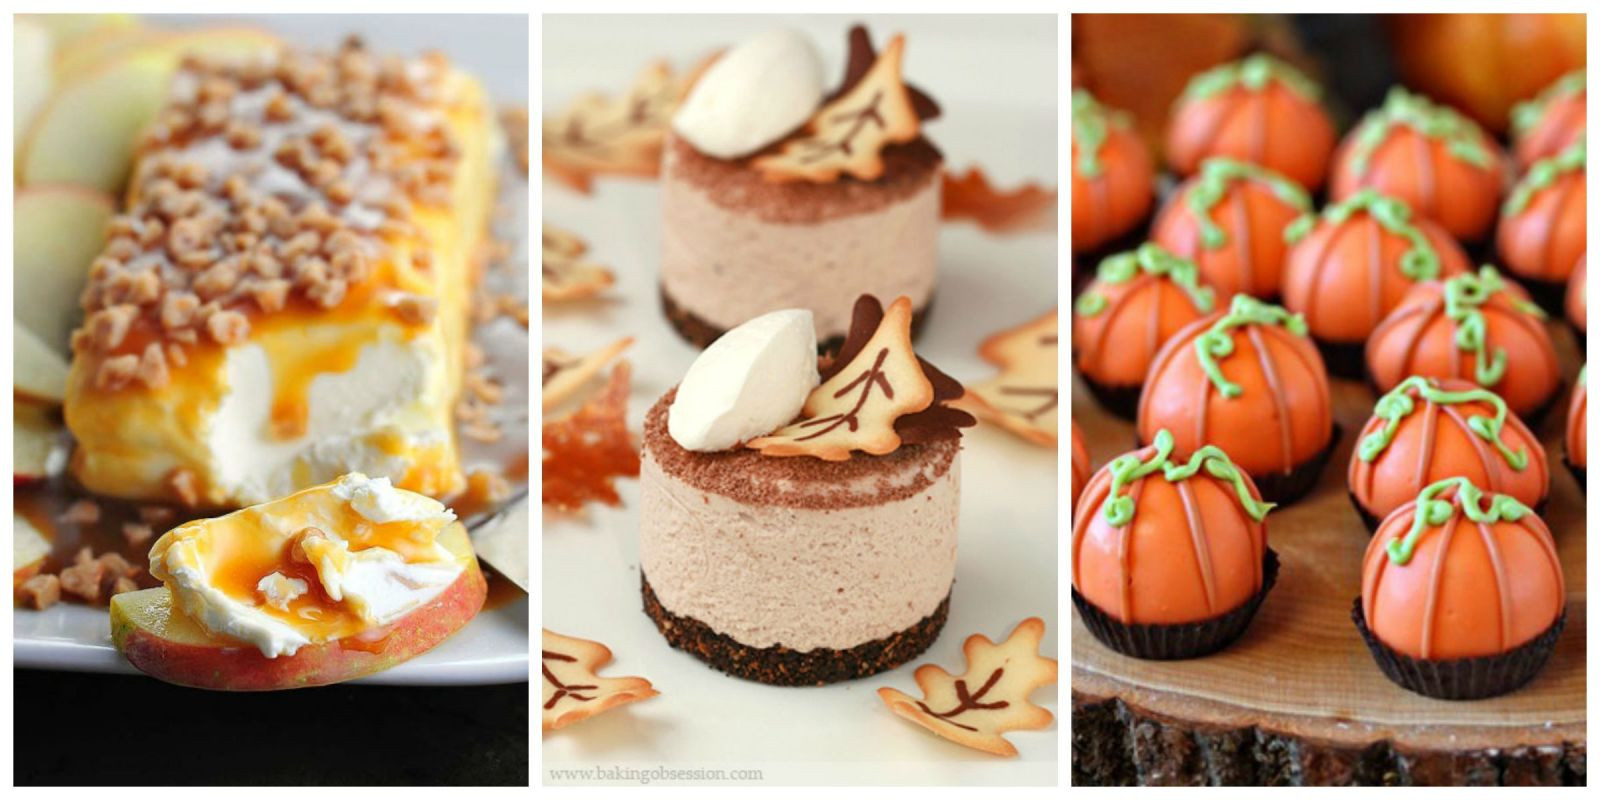 Fall Desserts For Kids
 35 Easy Fall Dessert Recipes Best Treats for Autumn Parties